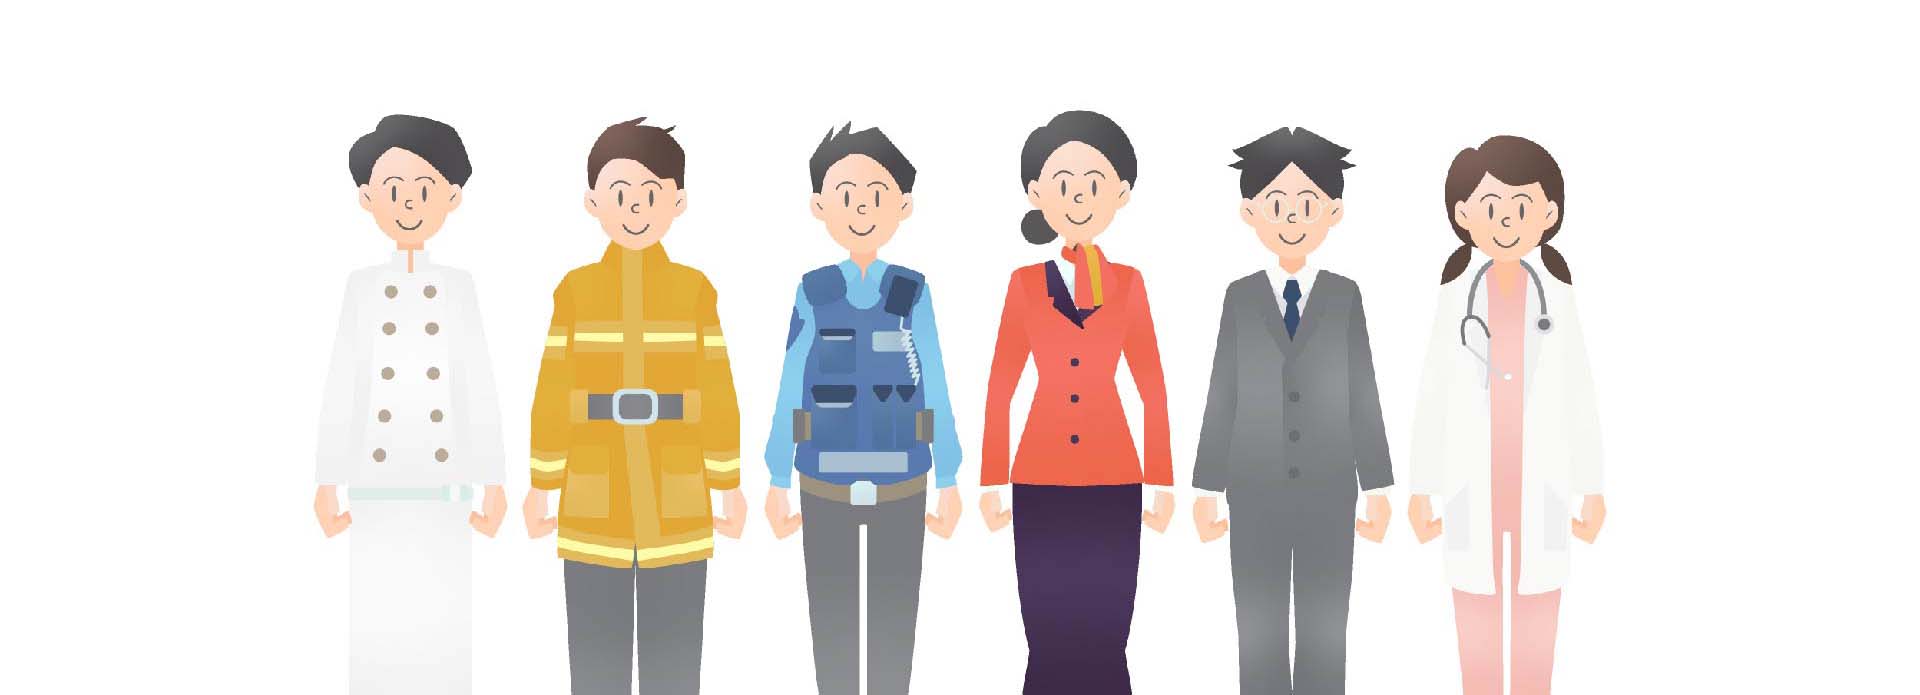 different personas for digital marketing audience targeting in Japan - Digital Marketing For Asia